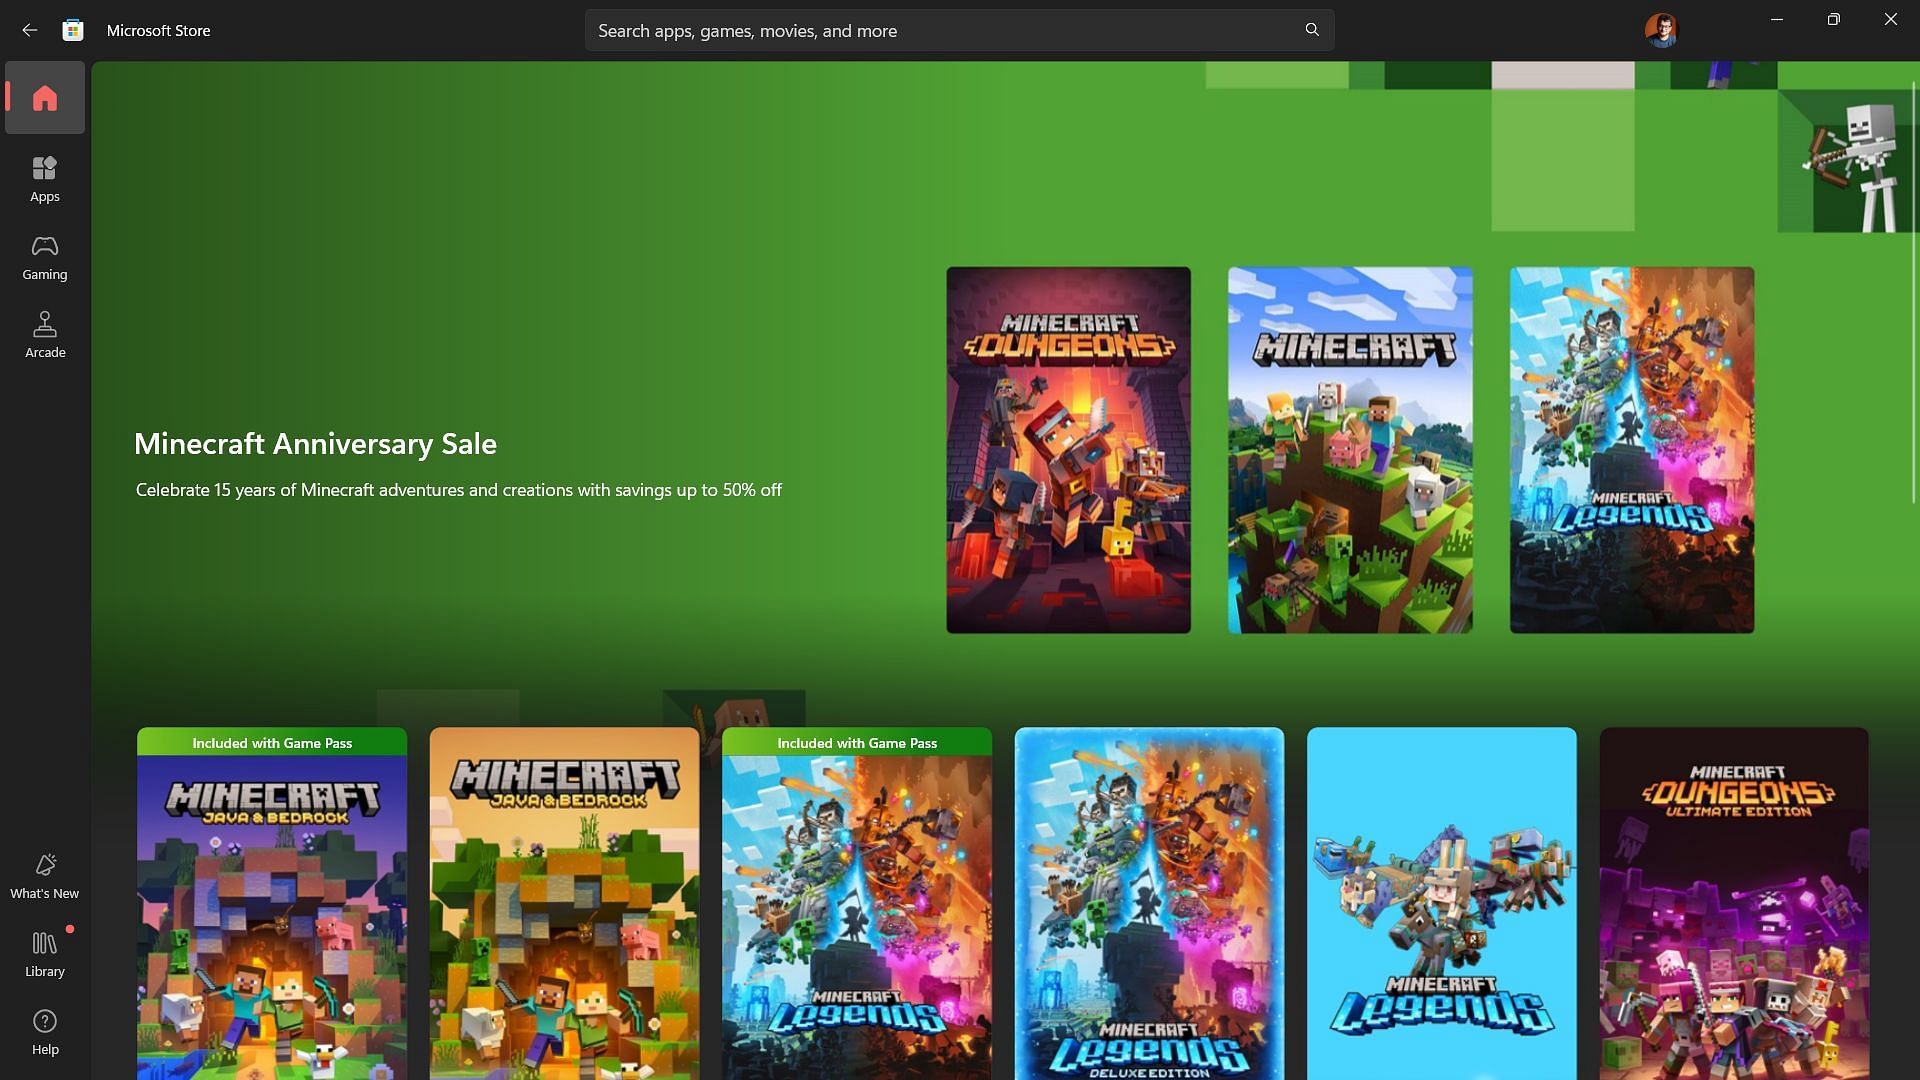 Microsoft Store showcasing the anniversary sale on all games and DLCs. (Image via Microsoft Store)